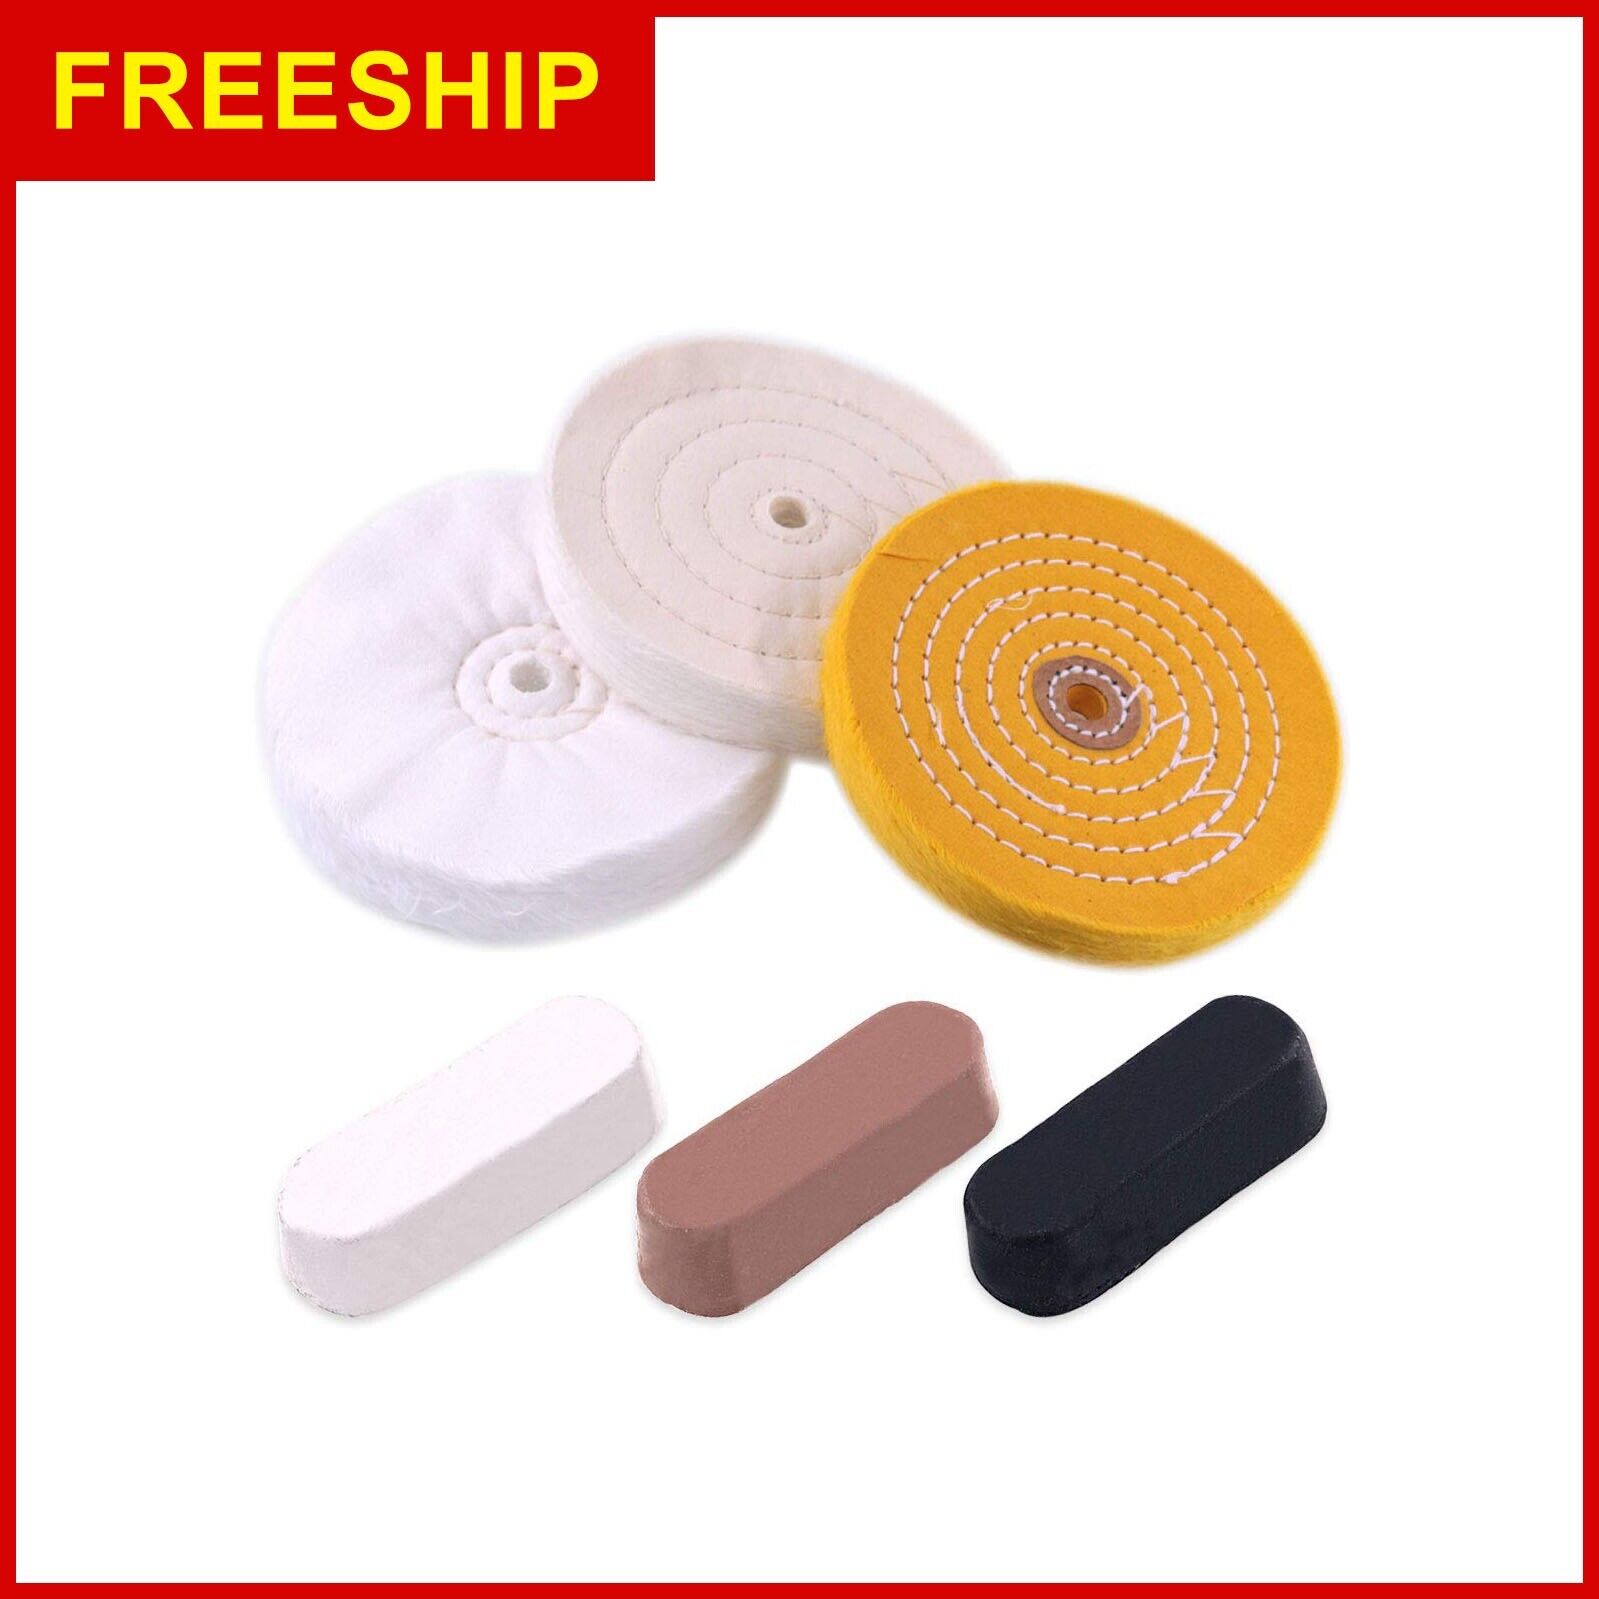 6 Piece Buffing And Polishing Kit Includes Assorted 6 Inch With 1/2" Arbor Hole